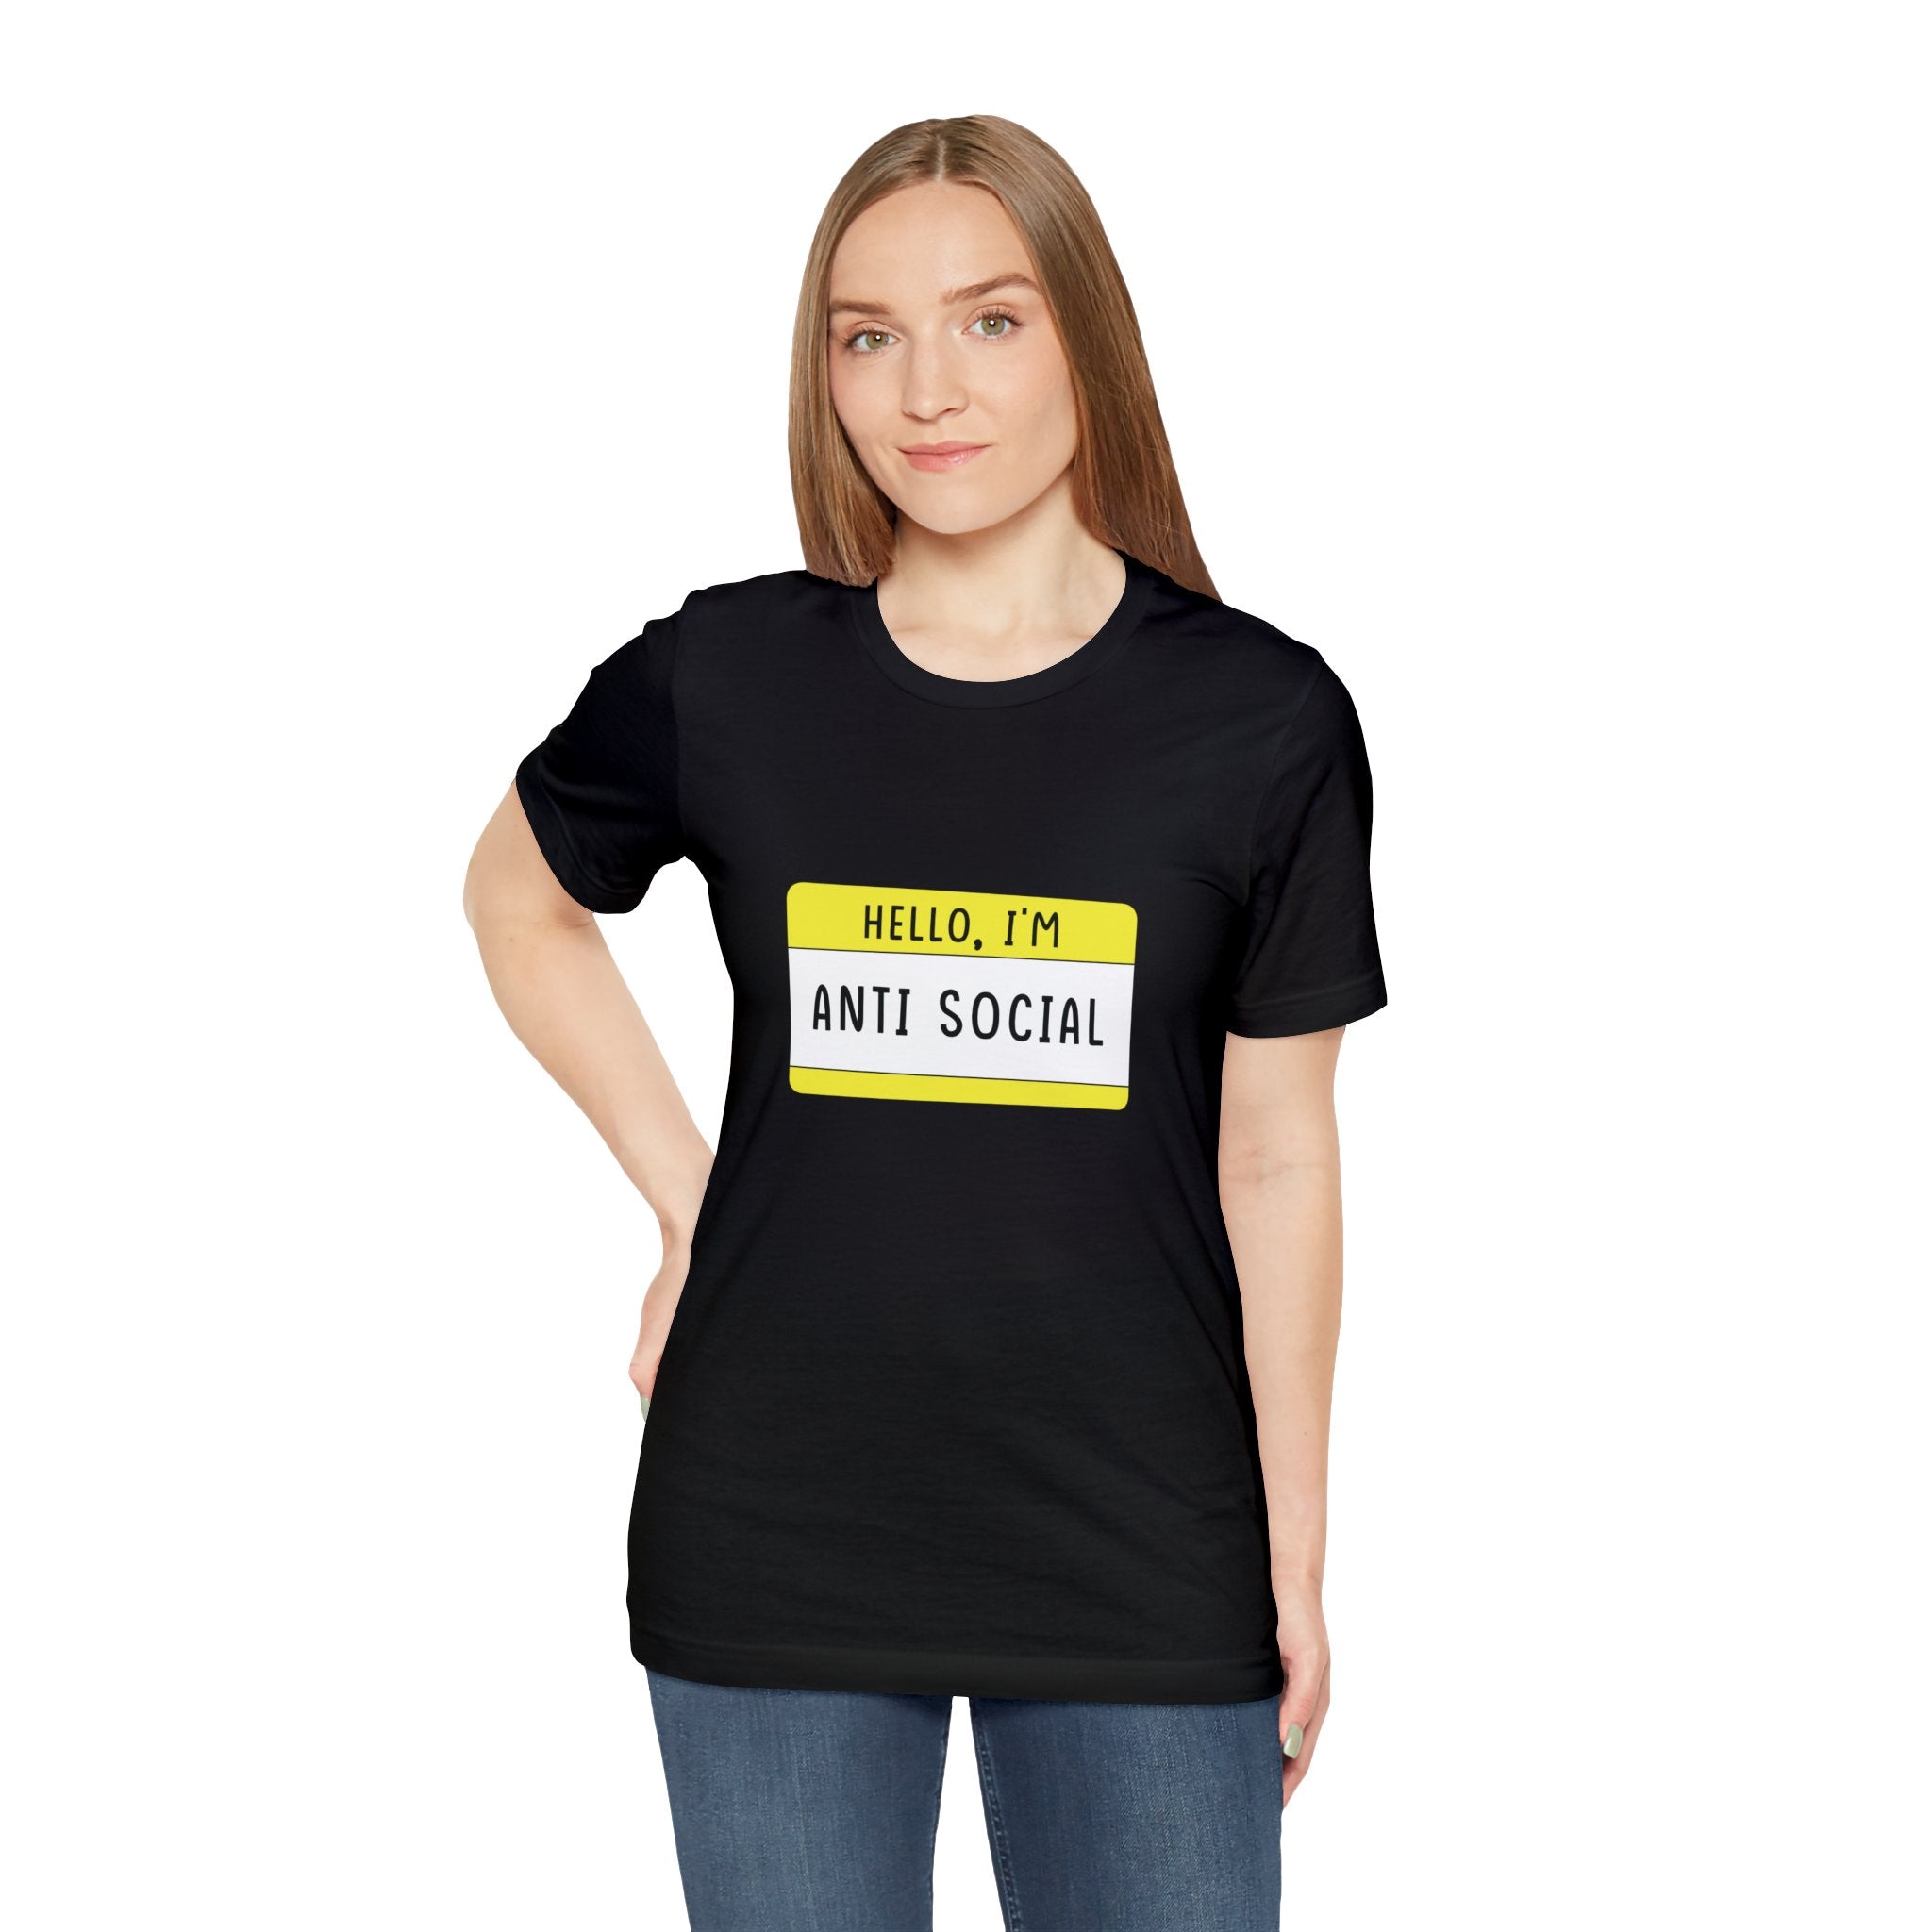 Woman wearing a Hello, I'm Anti Social T-Shirt with a yellow name tag design.